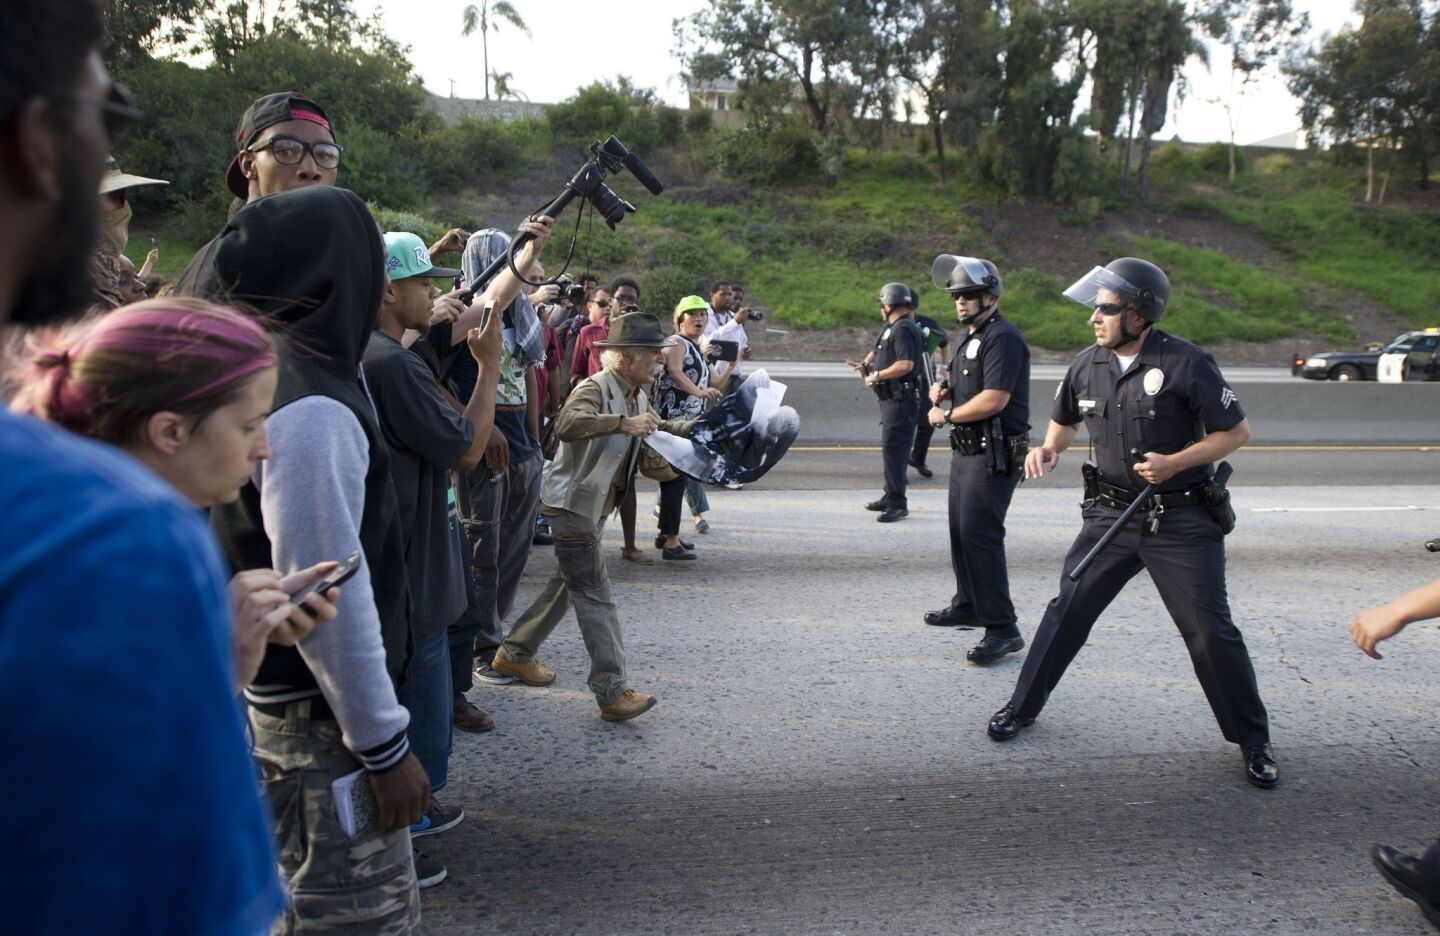 Police officers confront protesters on the 10 Freeway.